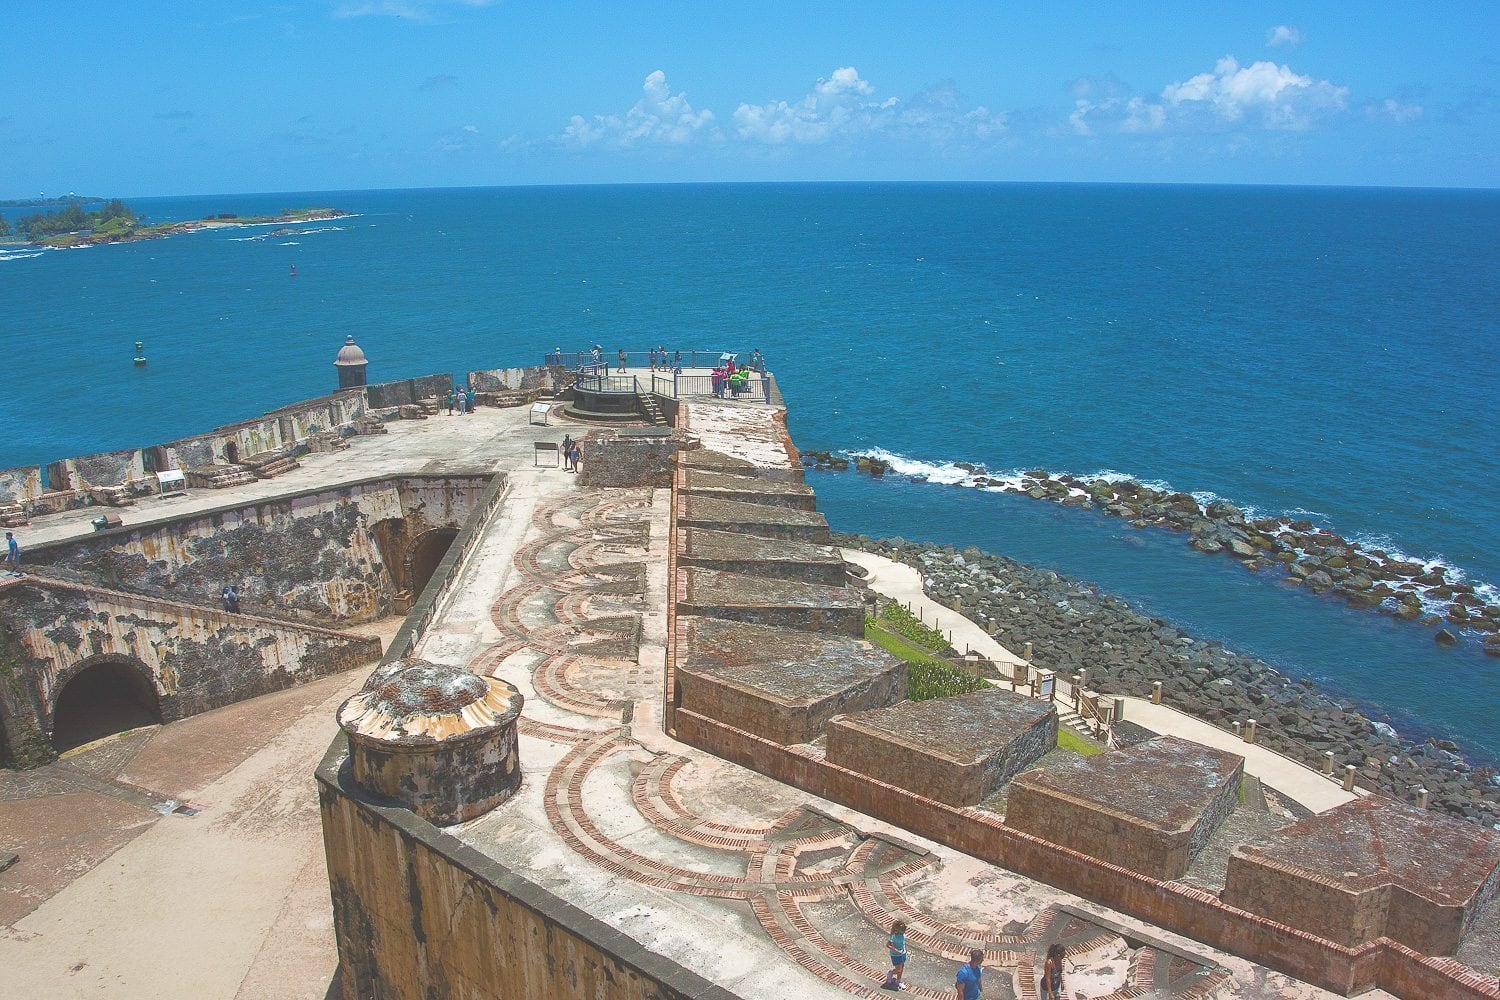 North and Ocean Facing side of El Morro Fort. My great-great-grandfather was held as a political prisoner here 1887. He was fighting for the same colonial issues we have now in 2016. I only hope my daughter gets to experience the Independence of my Island.